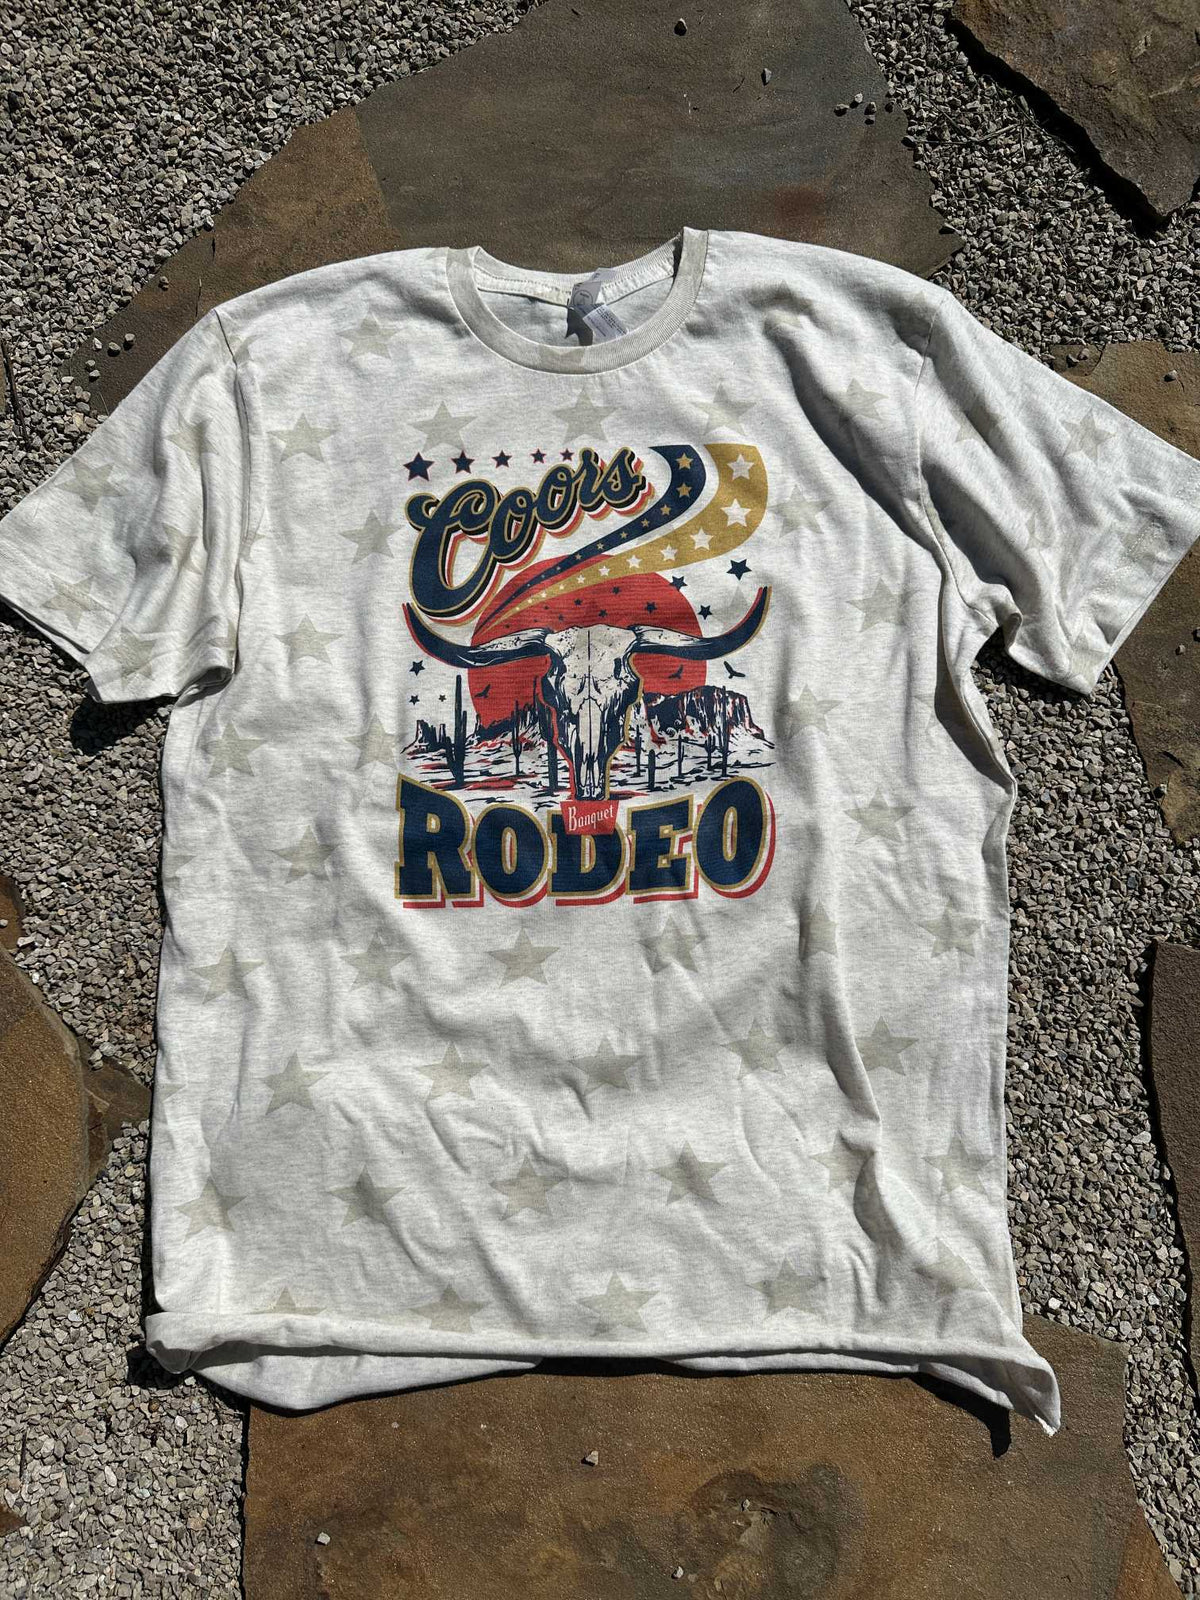 Coors Rodeo All American Tee